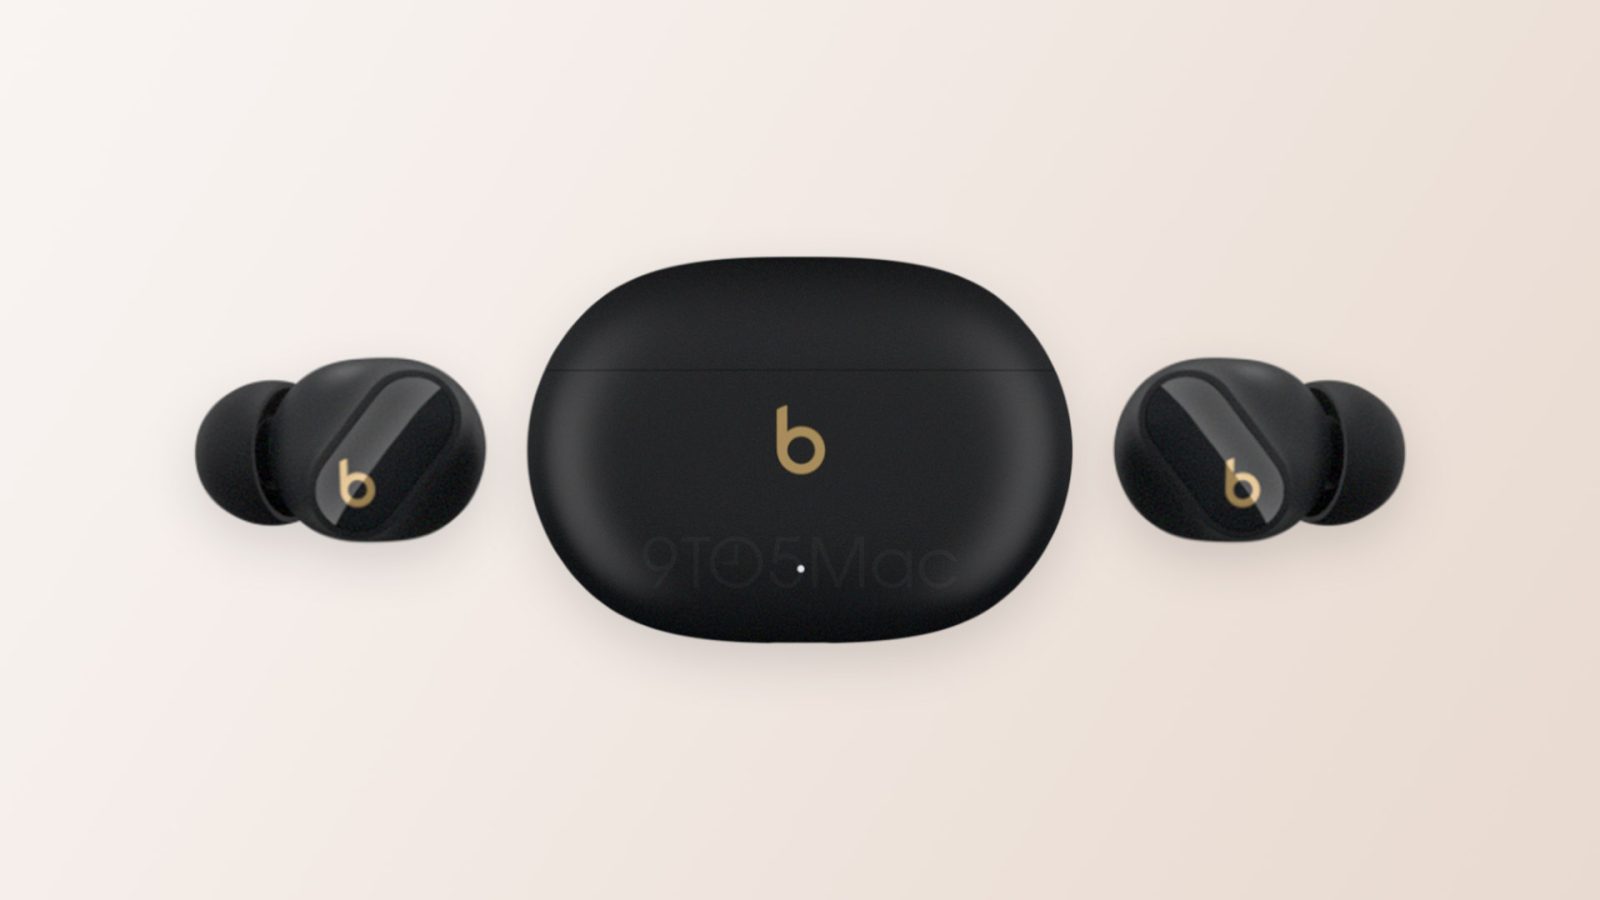 exclusive: New 'Beats Studio Buds+' headphones coming, possibly using same chip as AirPods